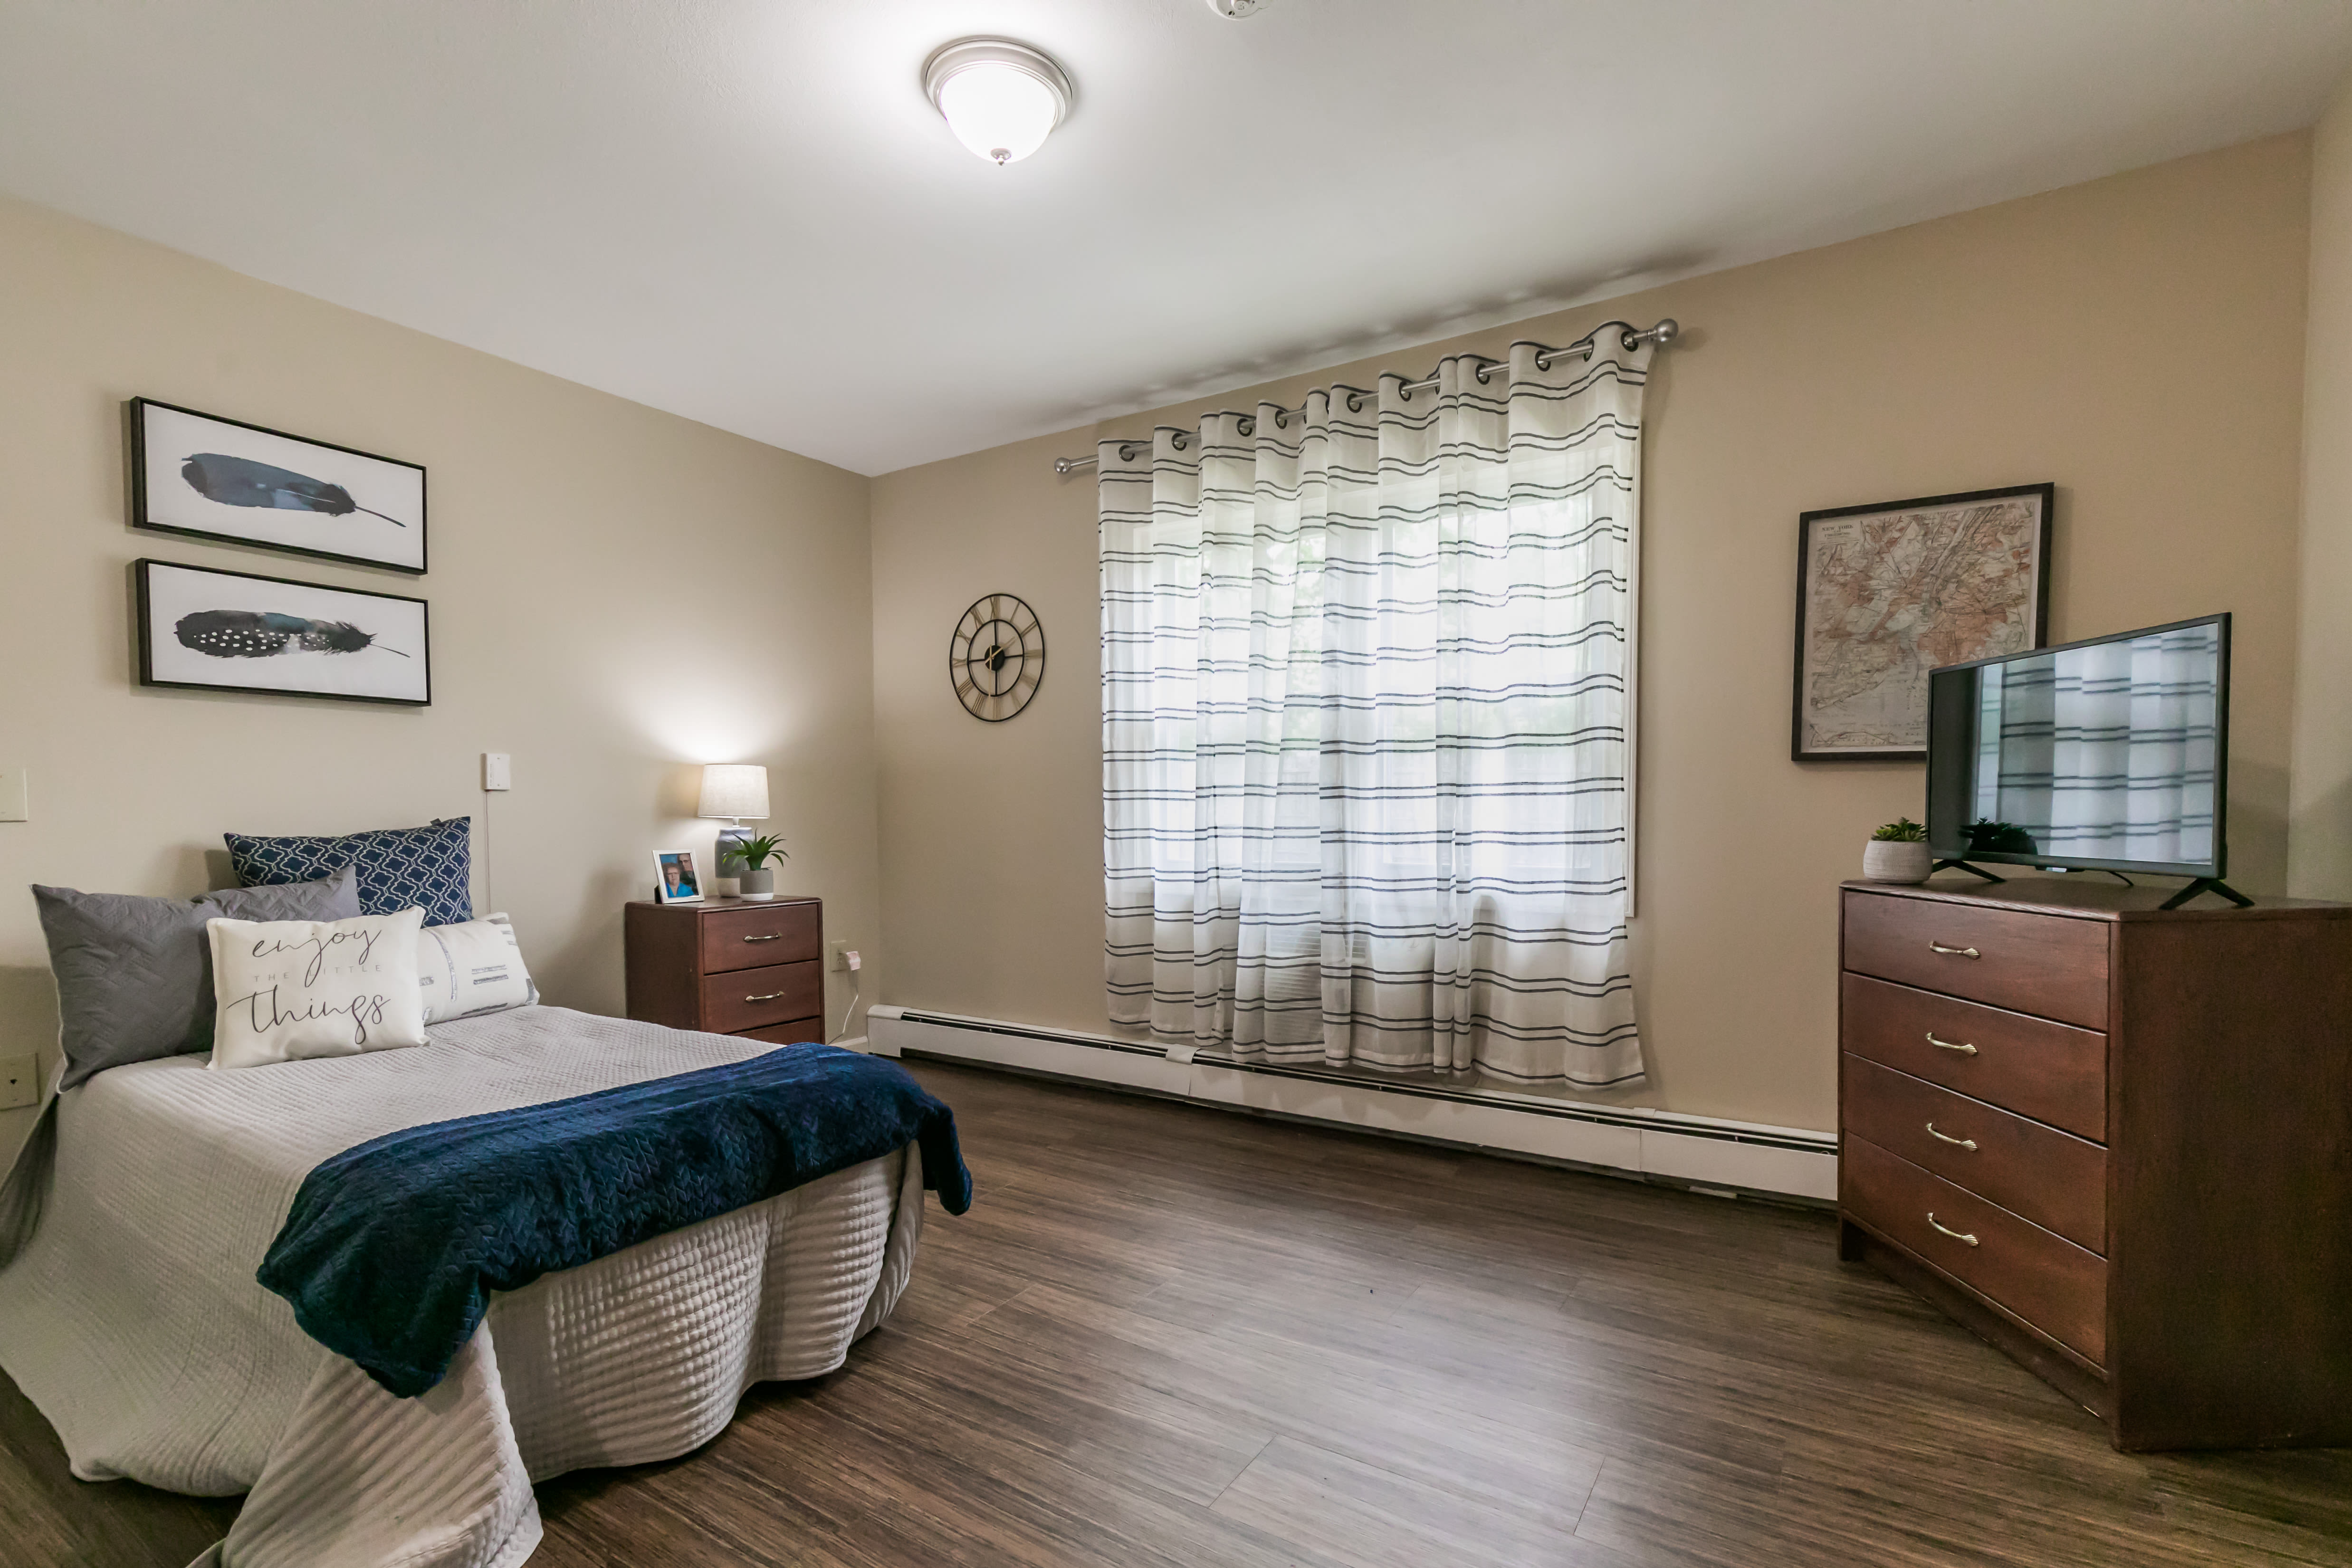 Private apartment at Keepsake Village at Greenpoint in Liverpool, New York